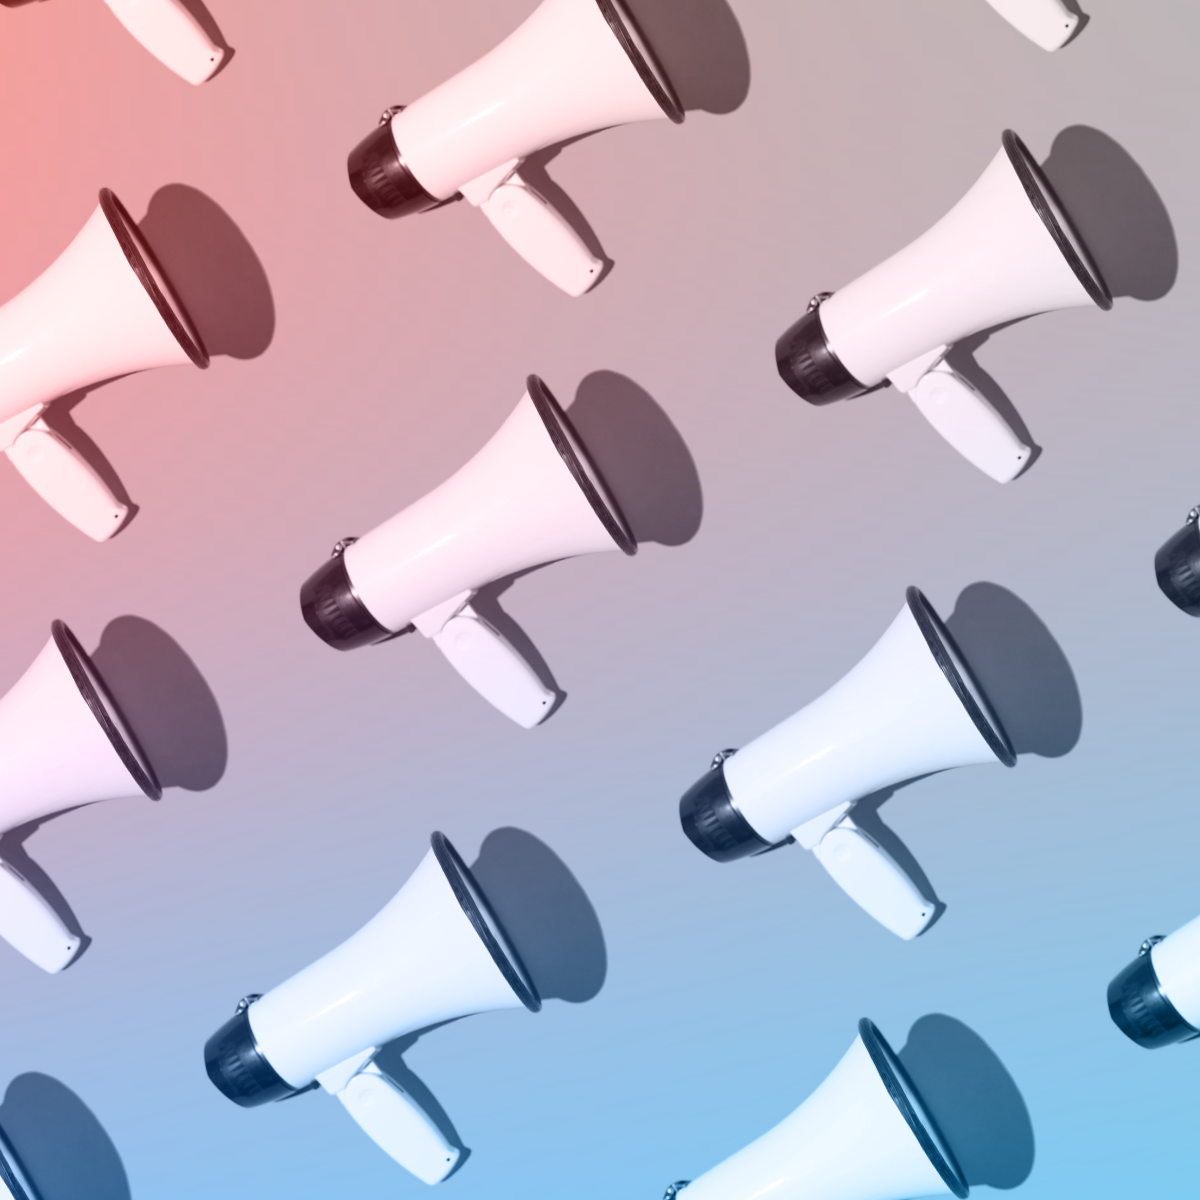 Rows of repeating megaphone images.